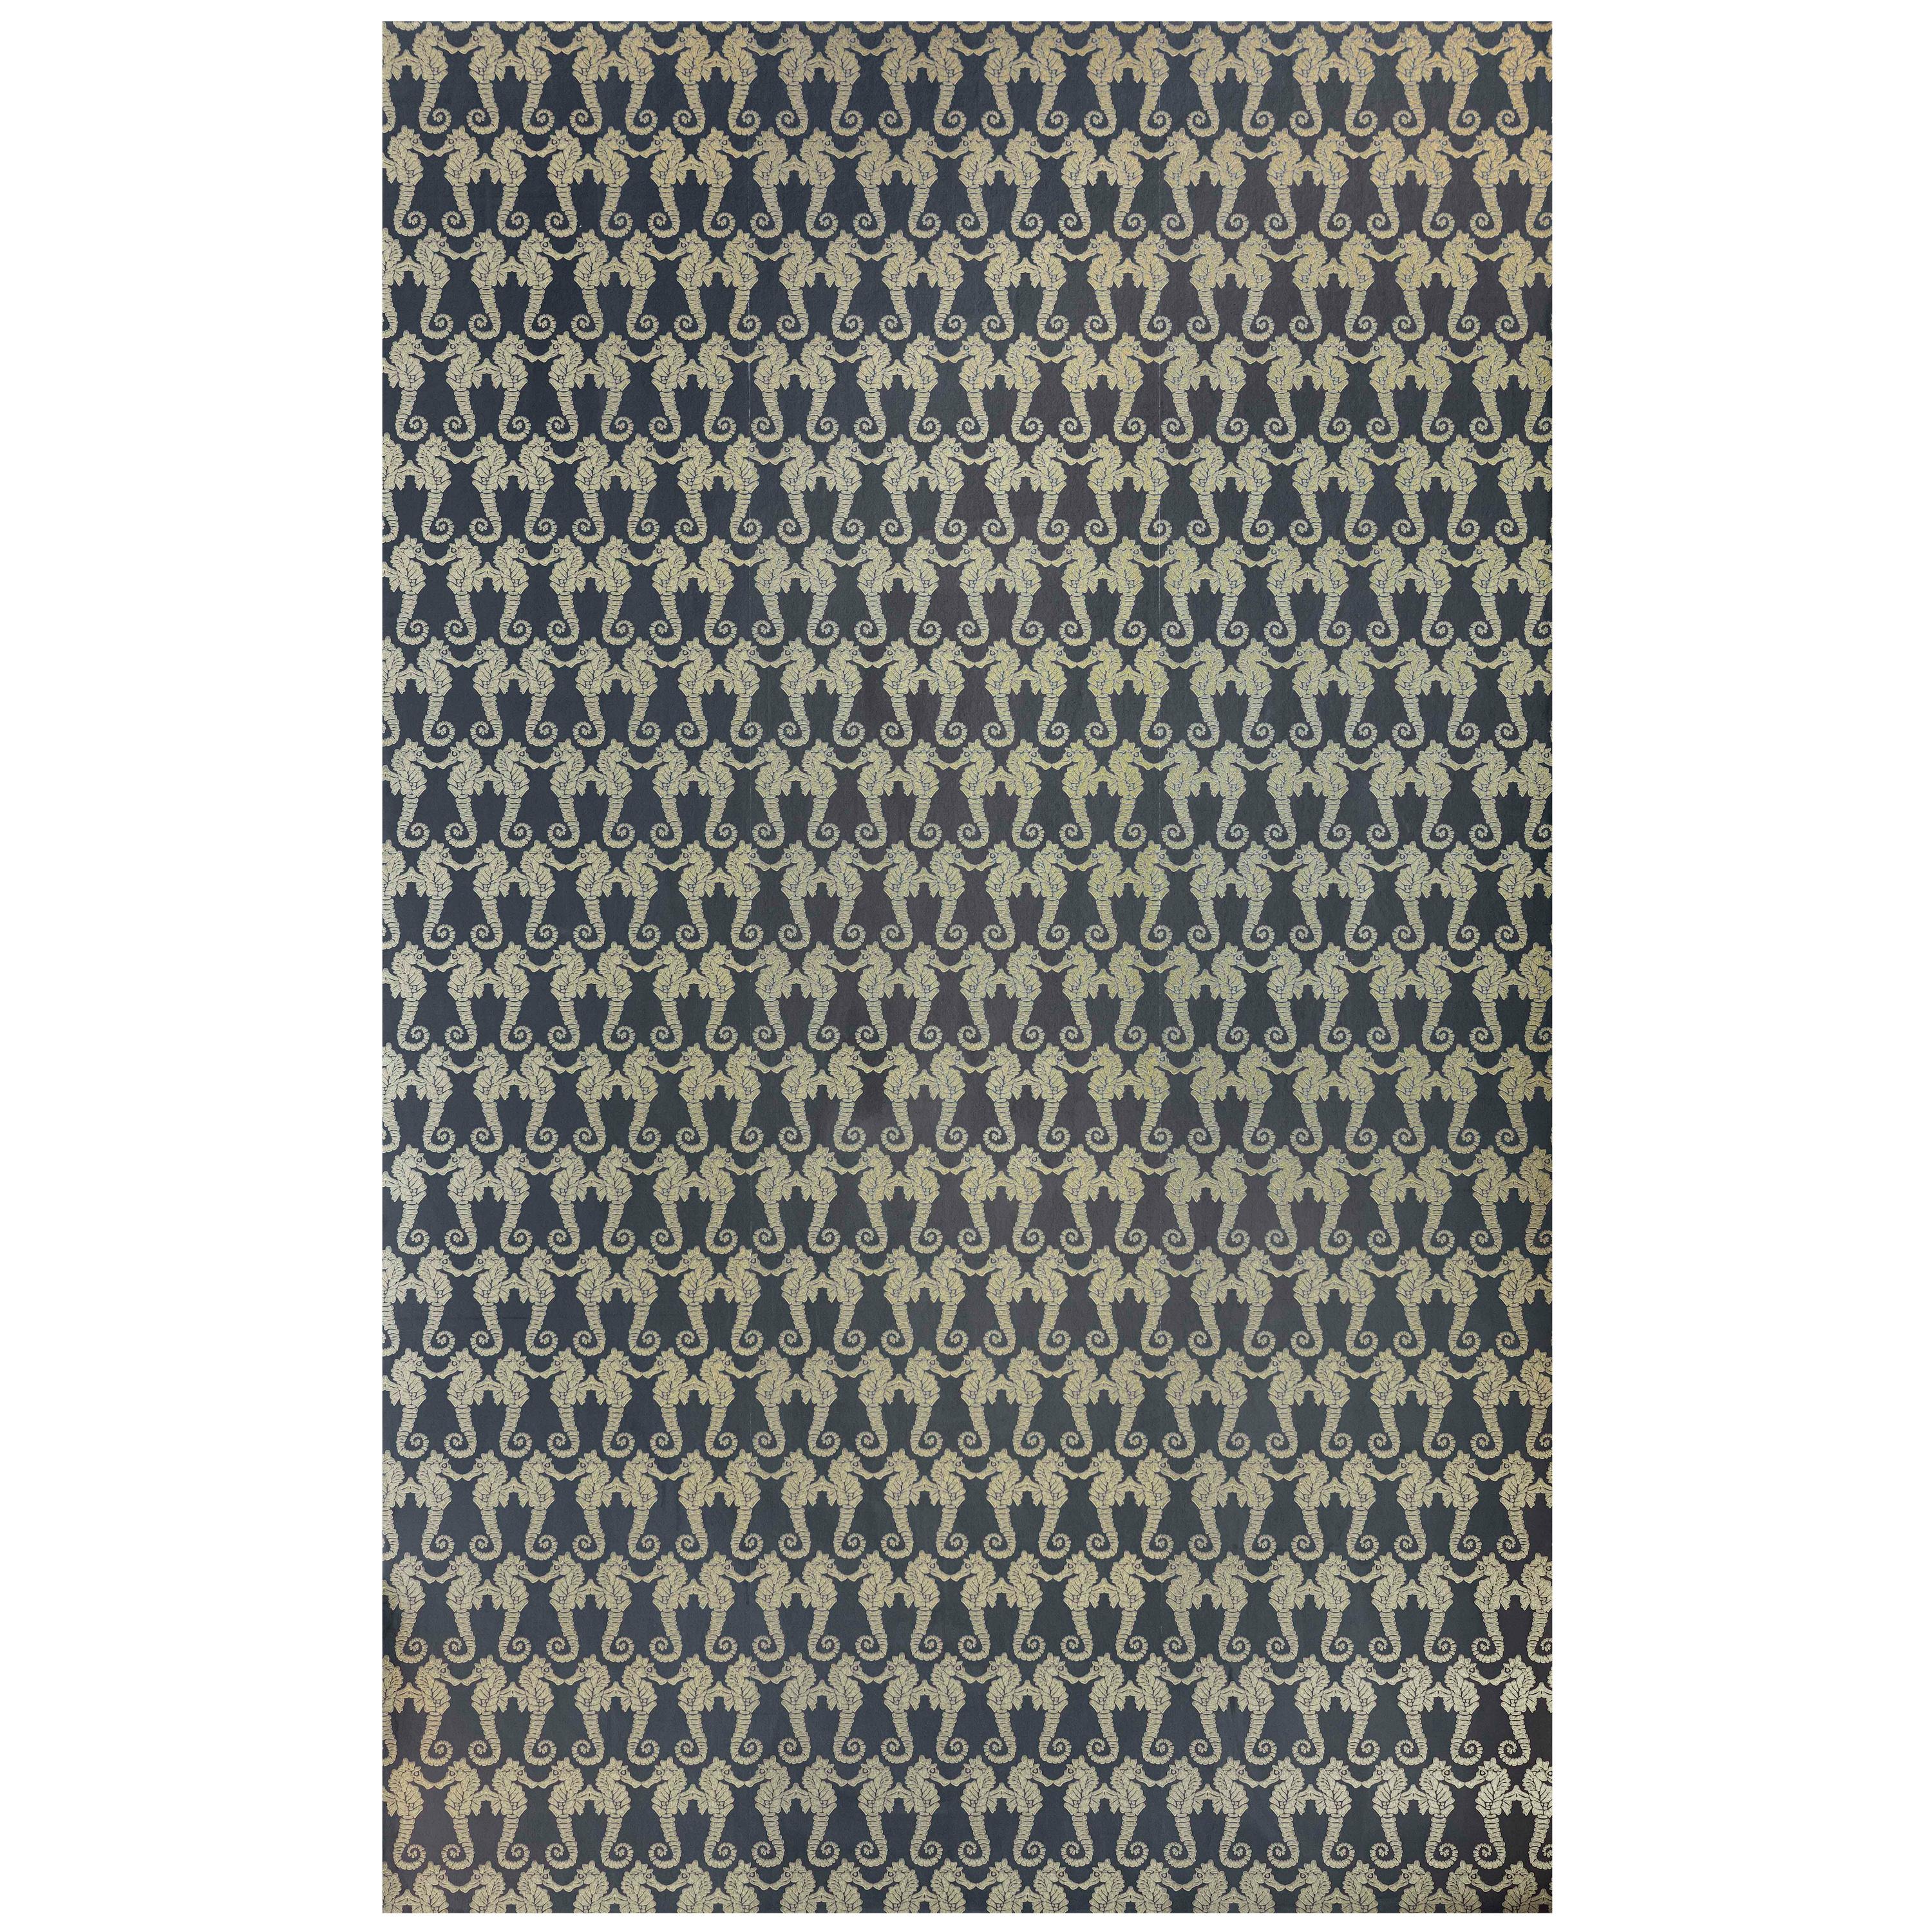 'Seahorse' Contemporary, Traditional Wallpaper in Charcoal/Gold For Sale